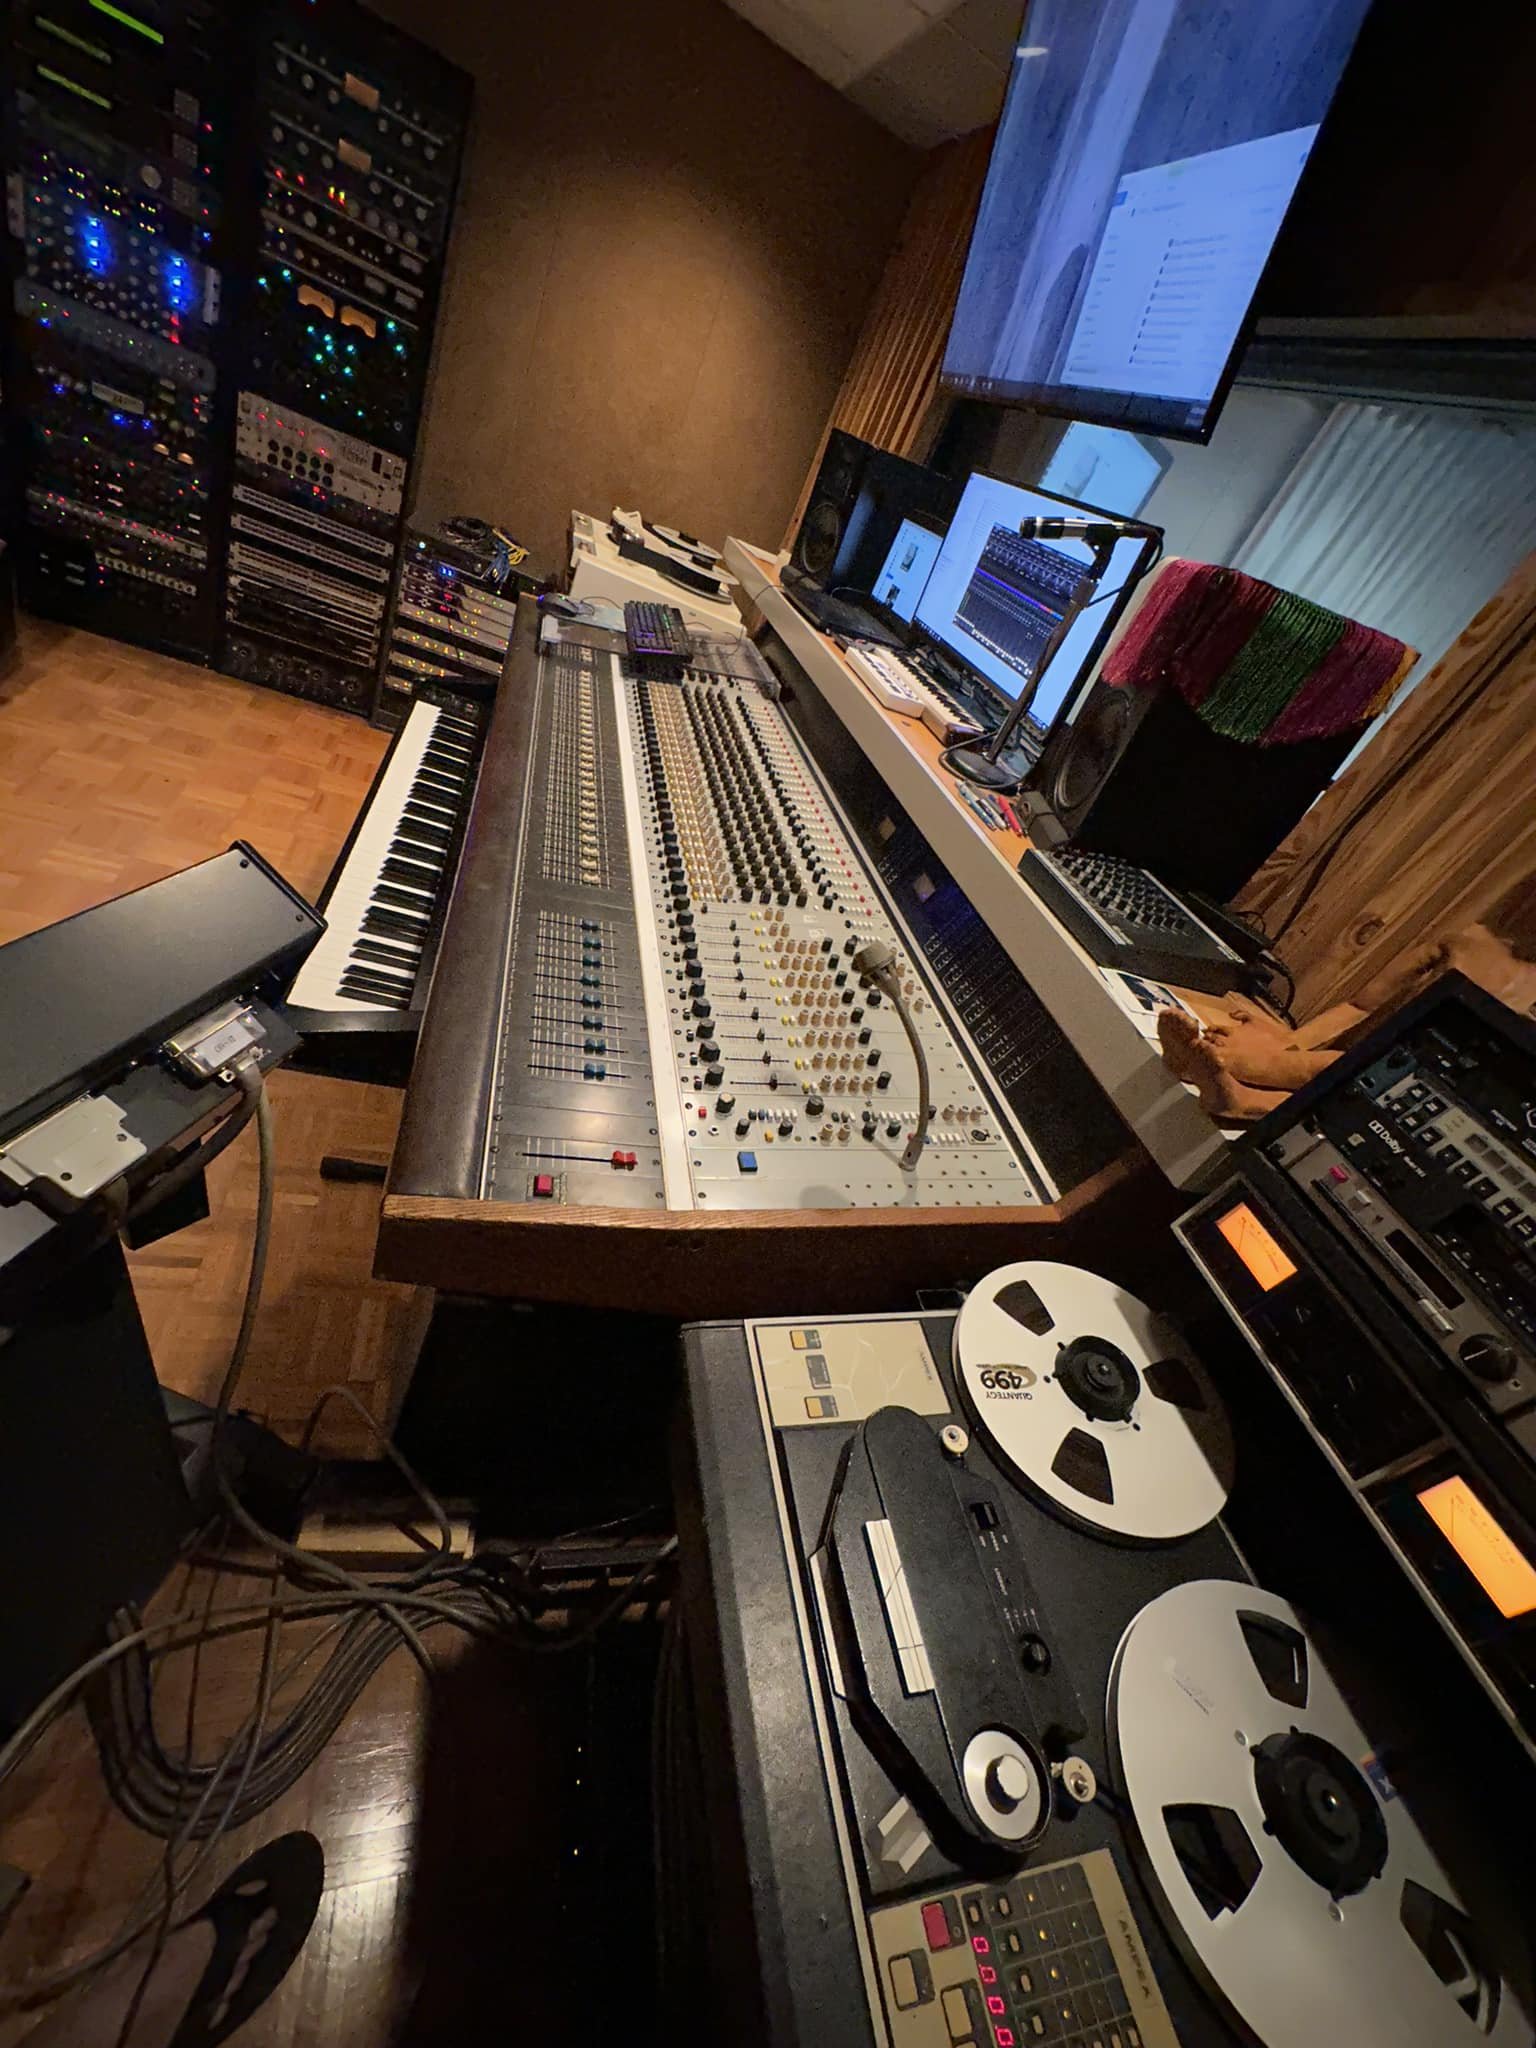 For the month of March I&rsquo;m running a studio sale. Every 8hours booked at Zen Recording get 2 extra hours for free for a total of $600 instead of the usual $800 get a total of 10hours to record/dub/mix/master all for about $60hr. Extra time for 